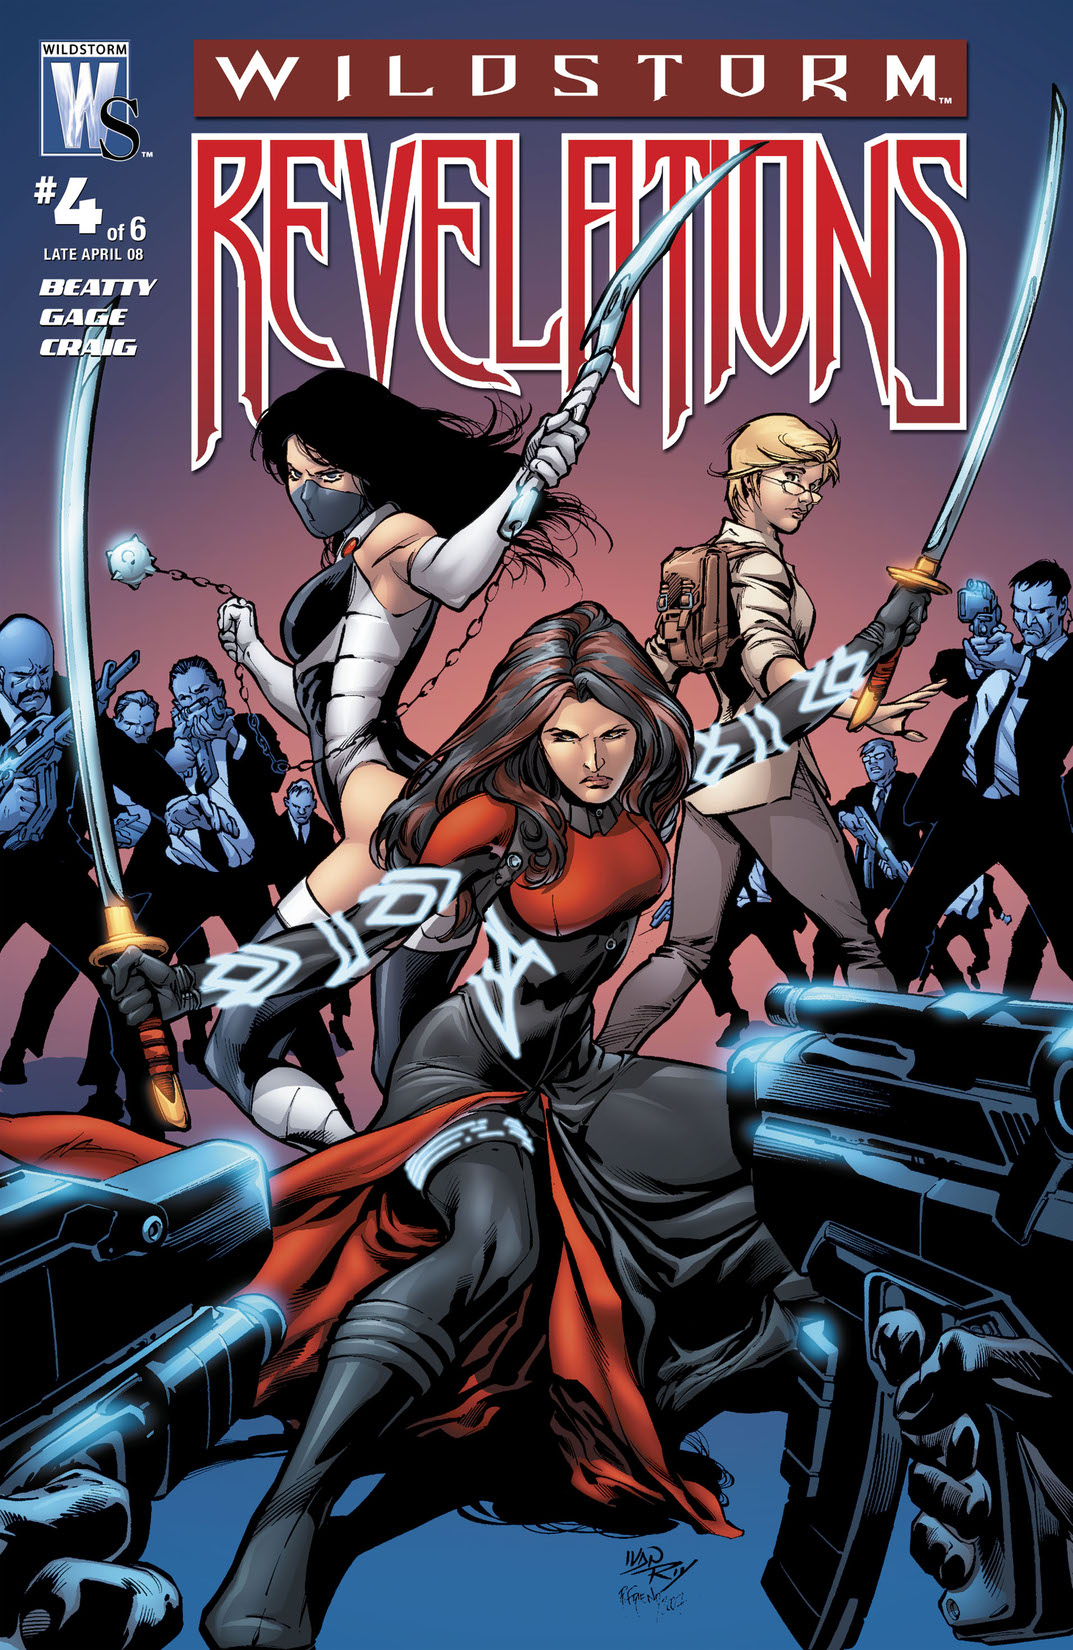 Wildstorm Revelations #4 preview images